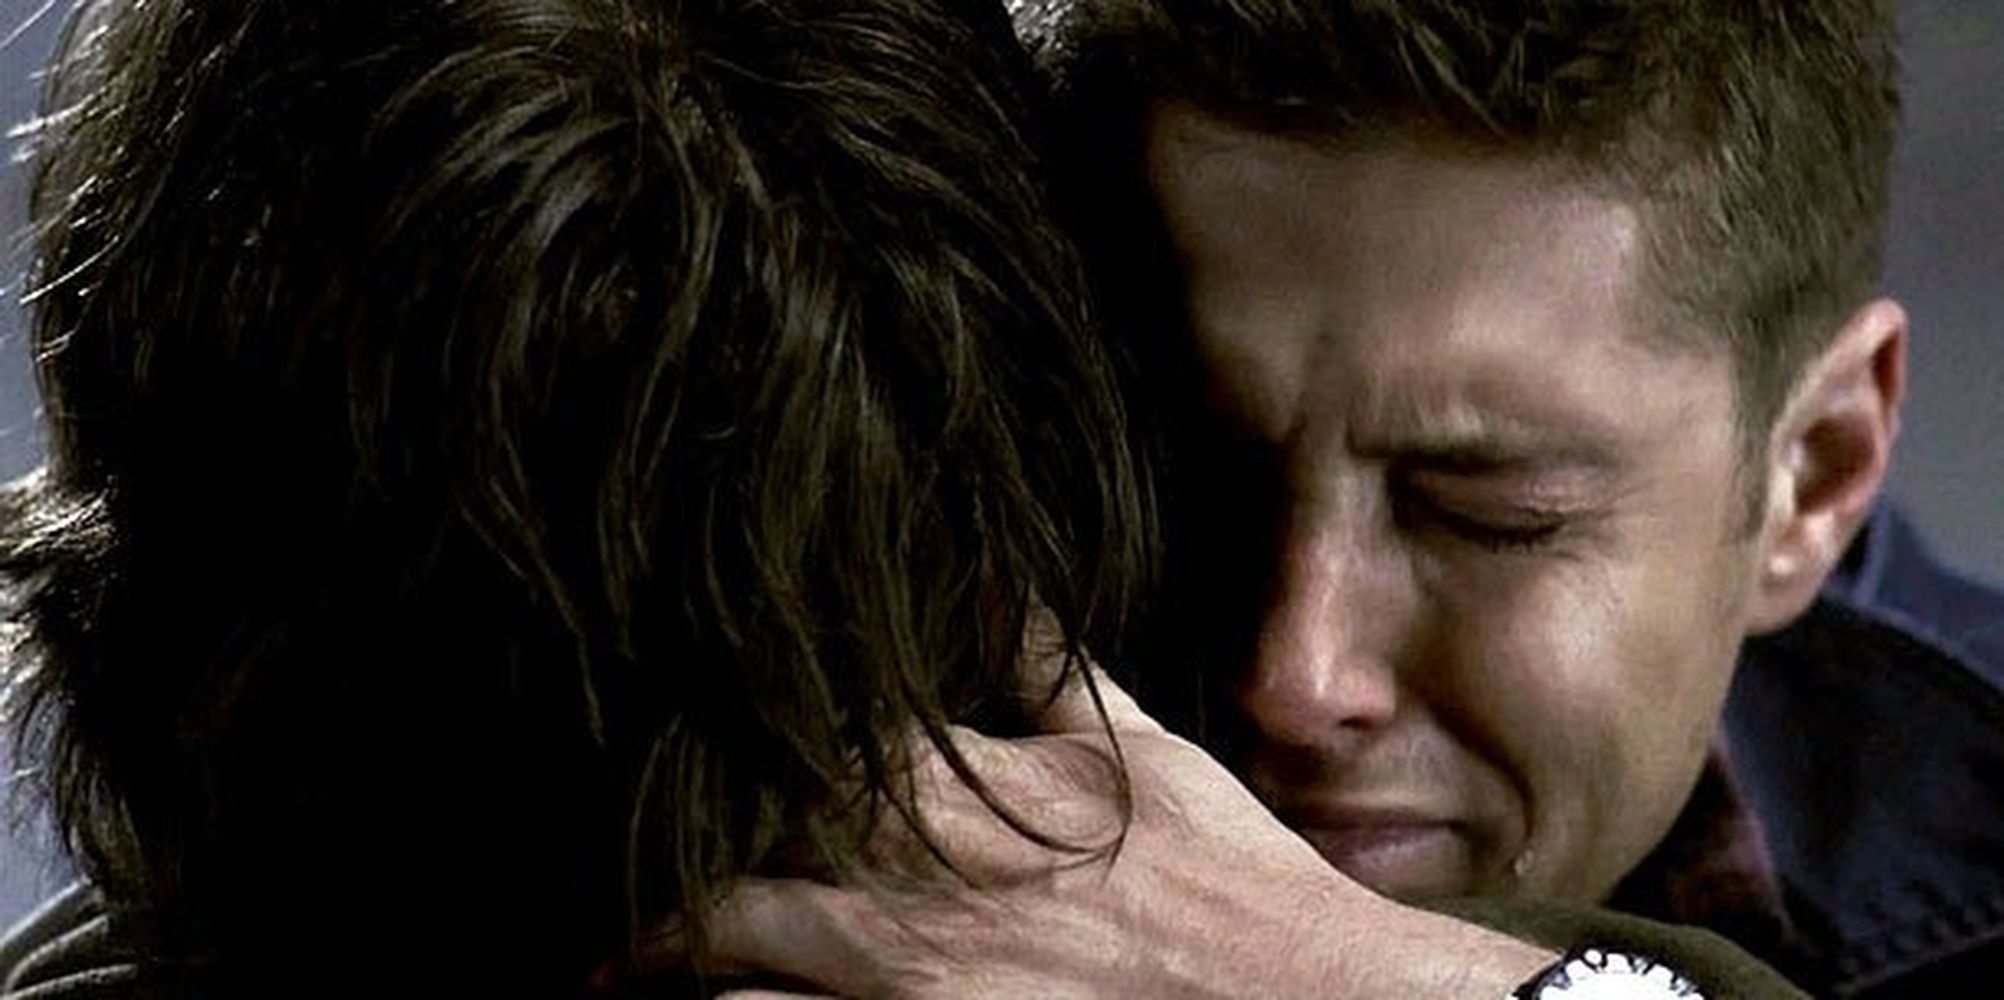 Dean hugging Sam and crying in Supernatural